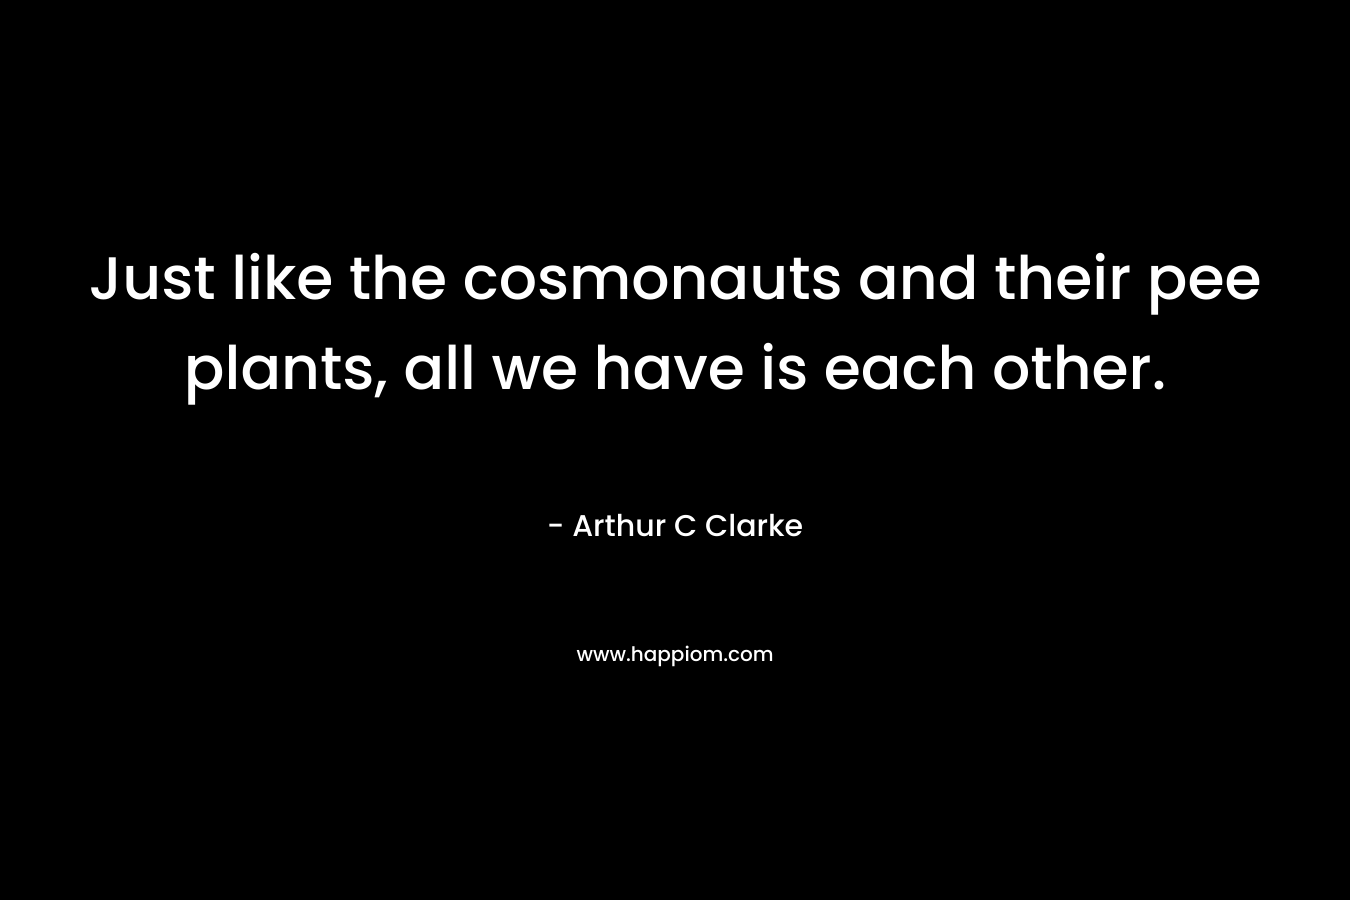 Just like the cosmonauts and their pee plants, all we have is each other. – Arthur C Clarke